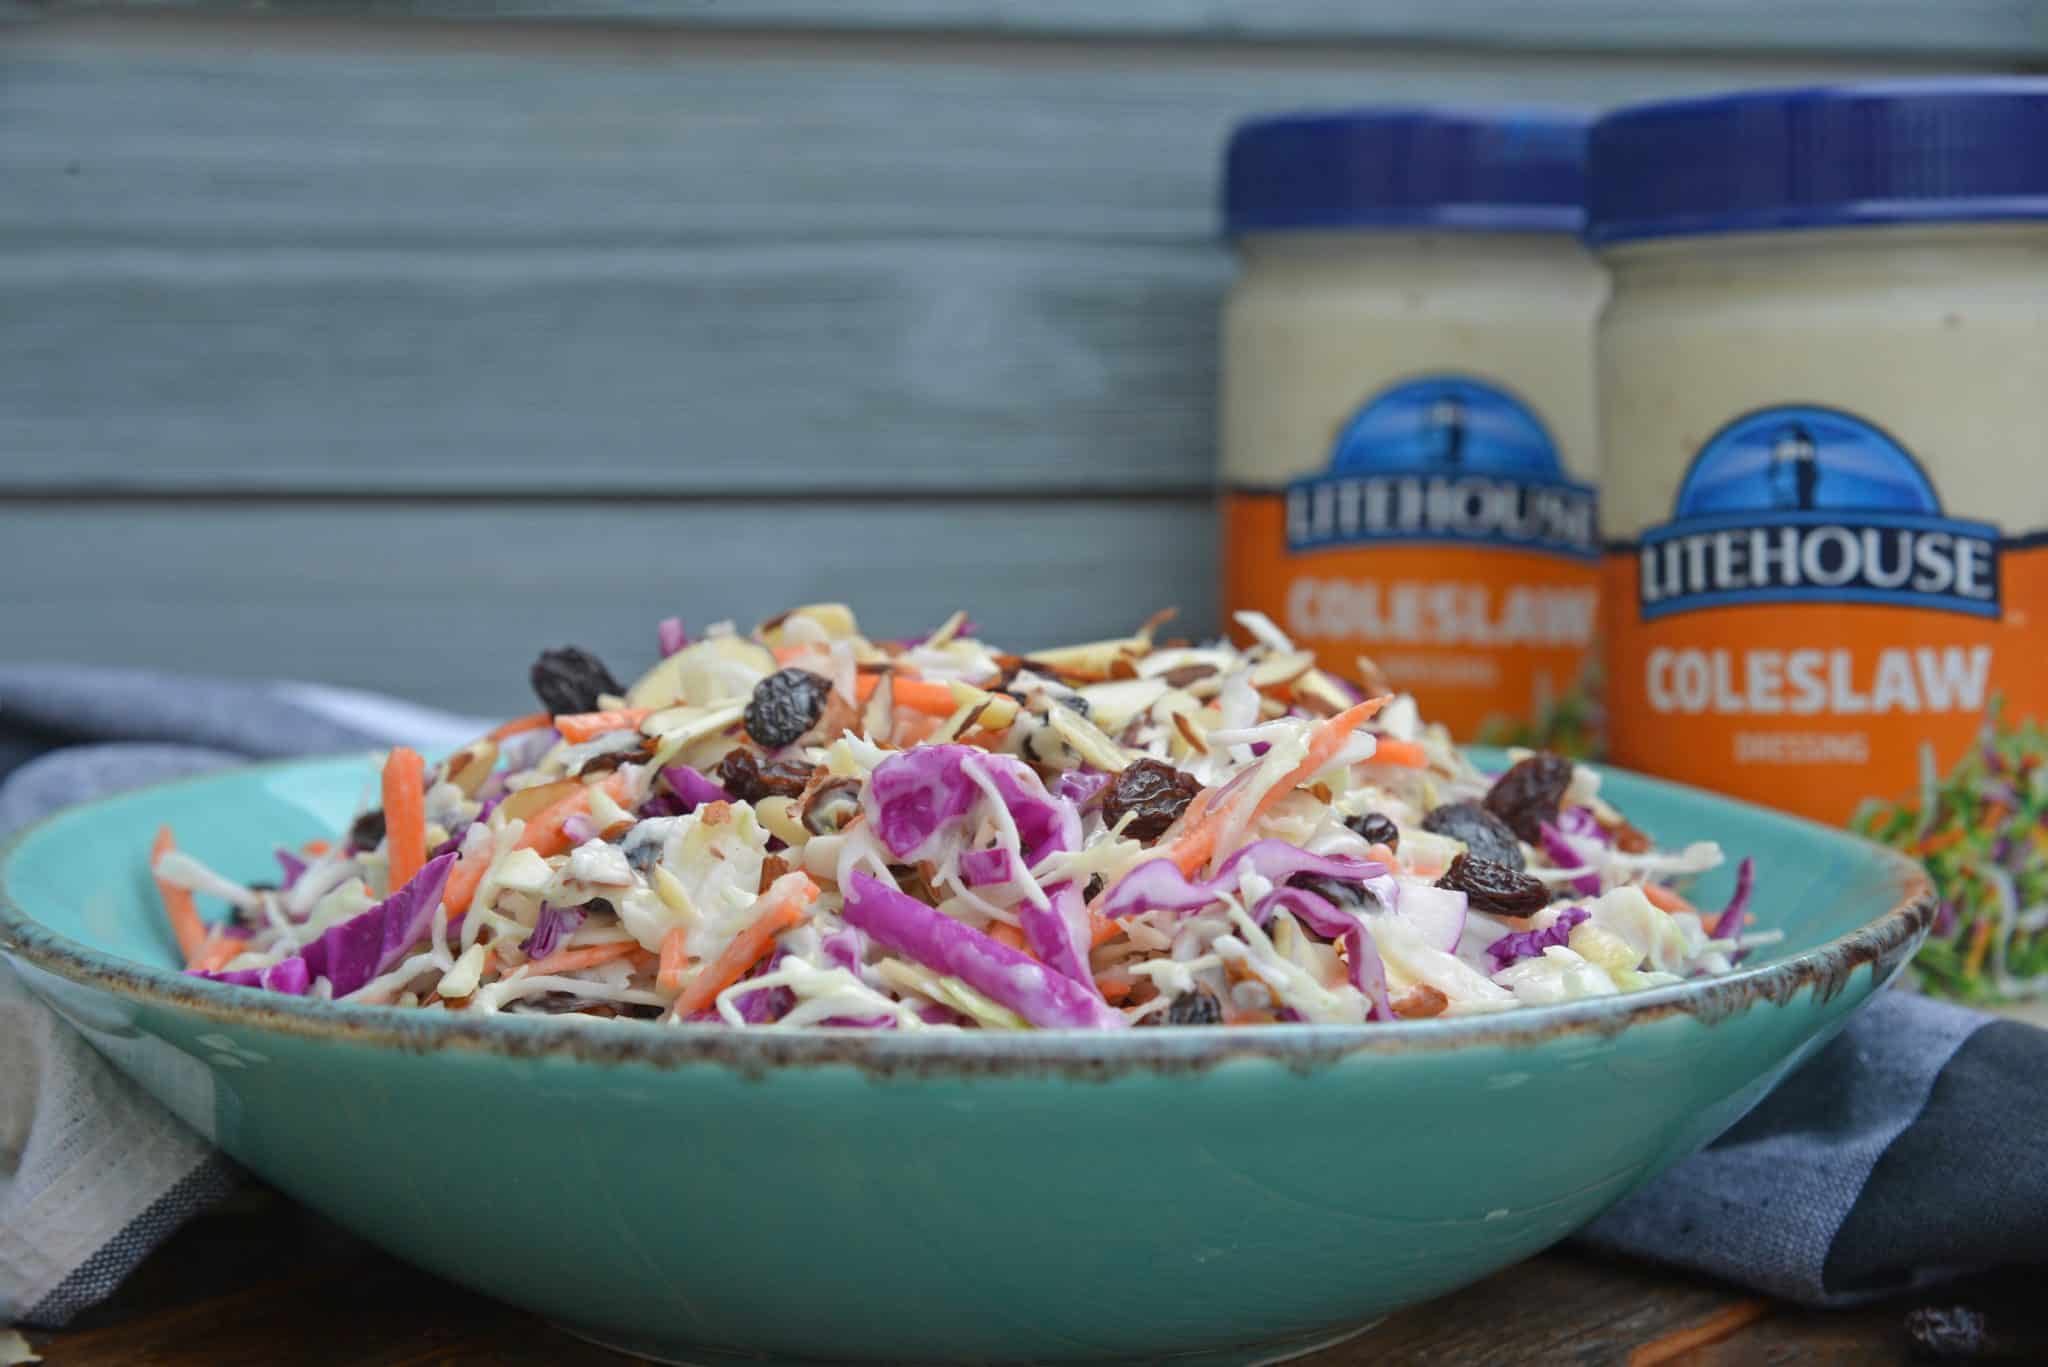 Creamy Coleslaw with almonds and raisins is an easy coleslaw recipe that is mix and serve. Coleslaw dressing, almonds, raisins and crisp cabbage mix are the perfect BBQ dish. #creamycoleslaw @coleslawrecipe www.savoryexperiments.com